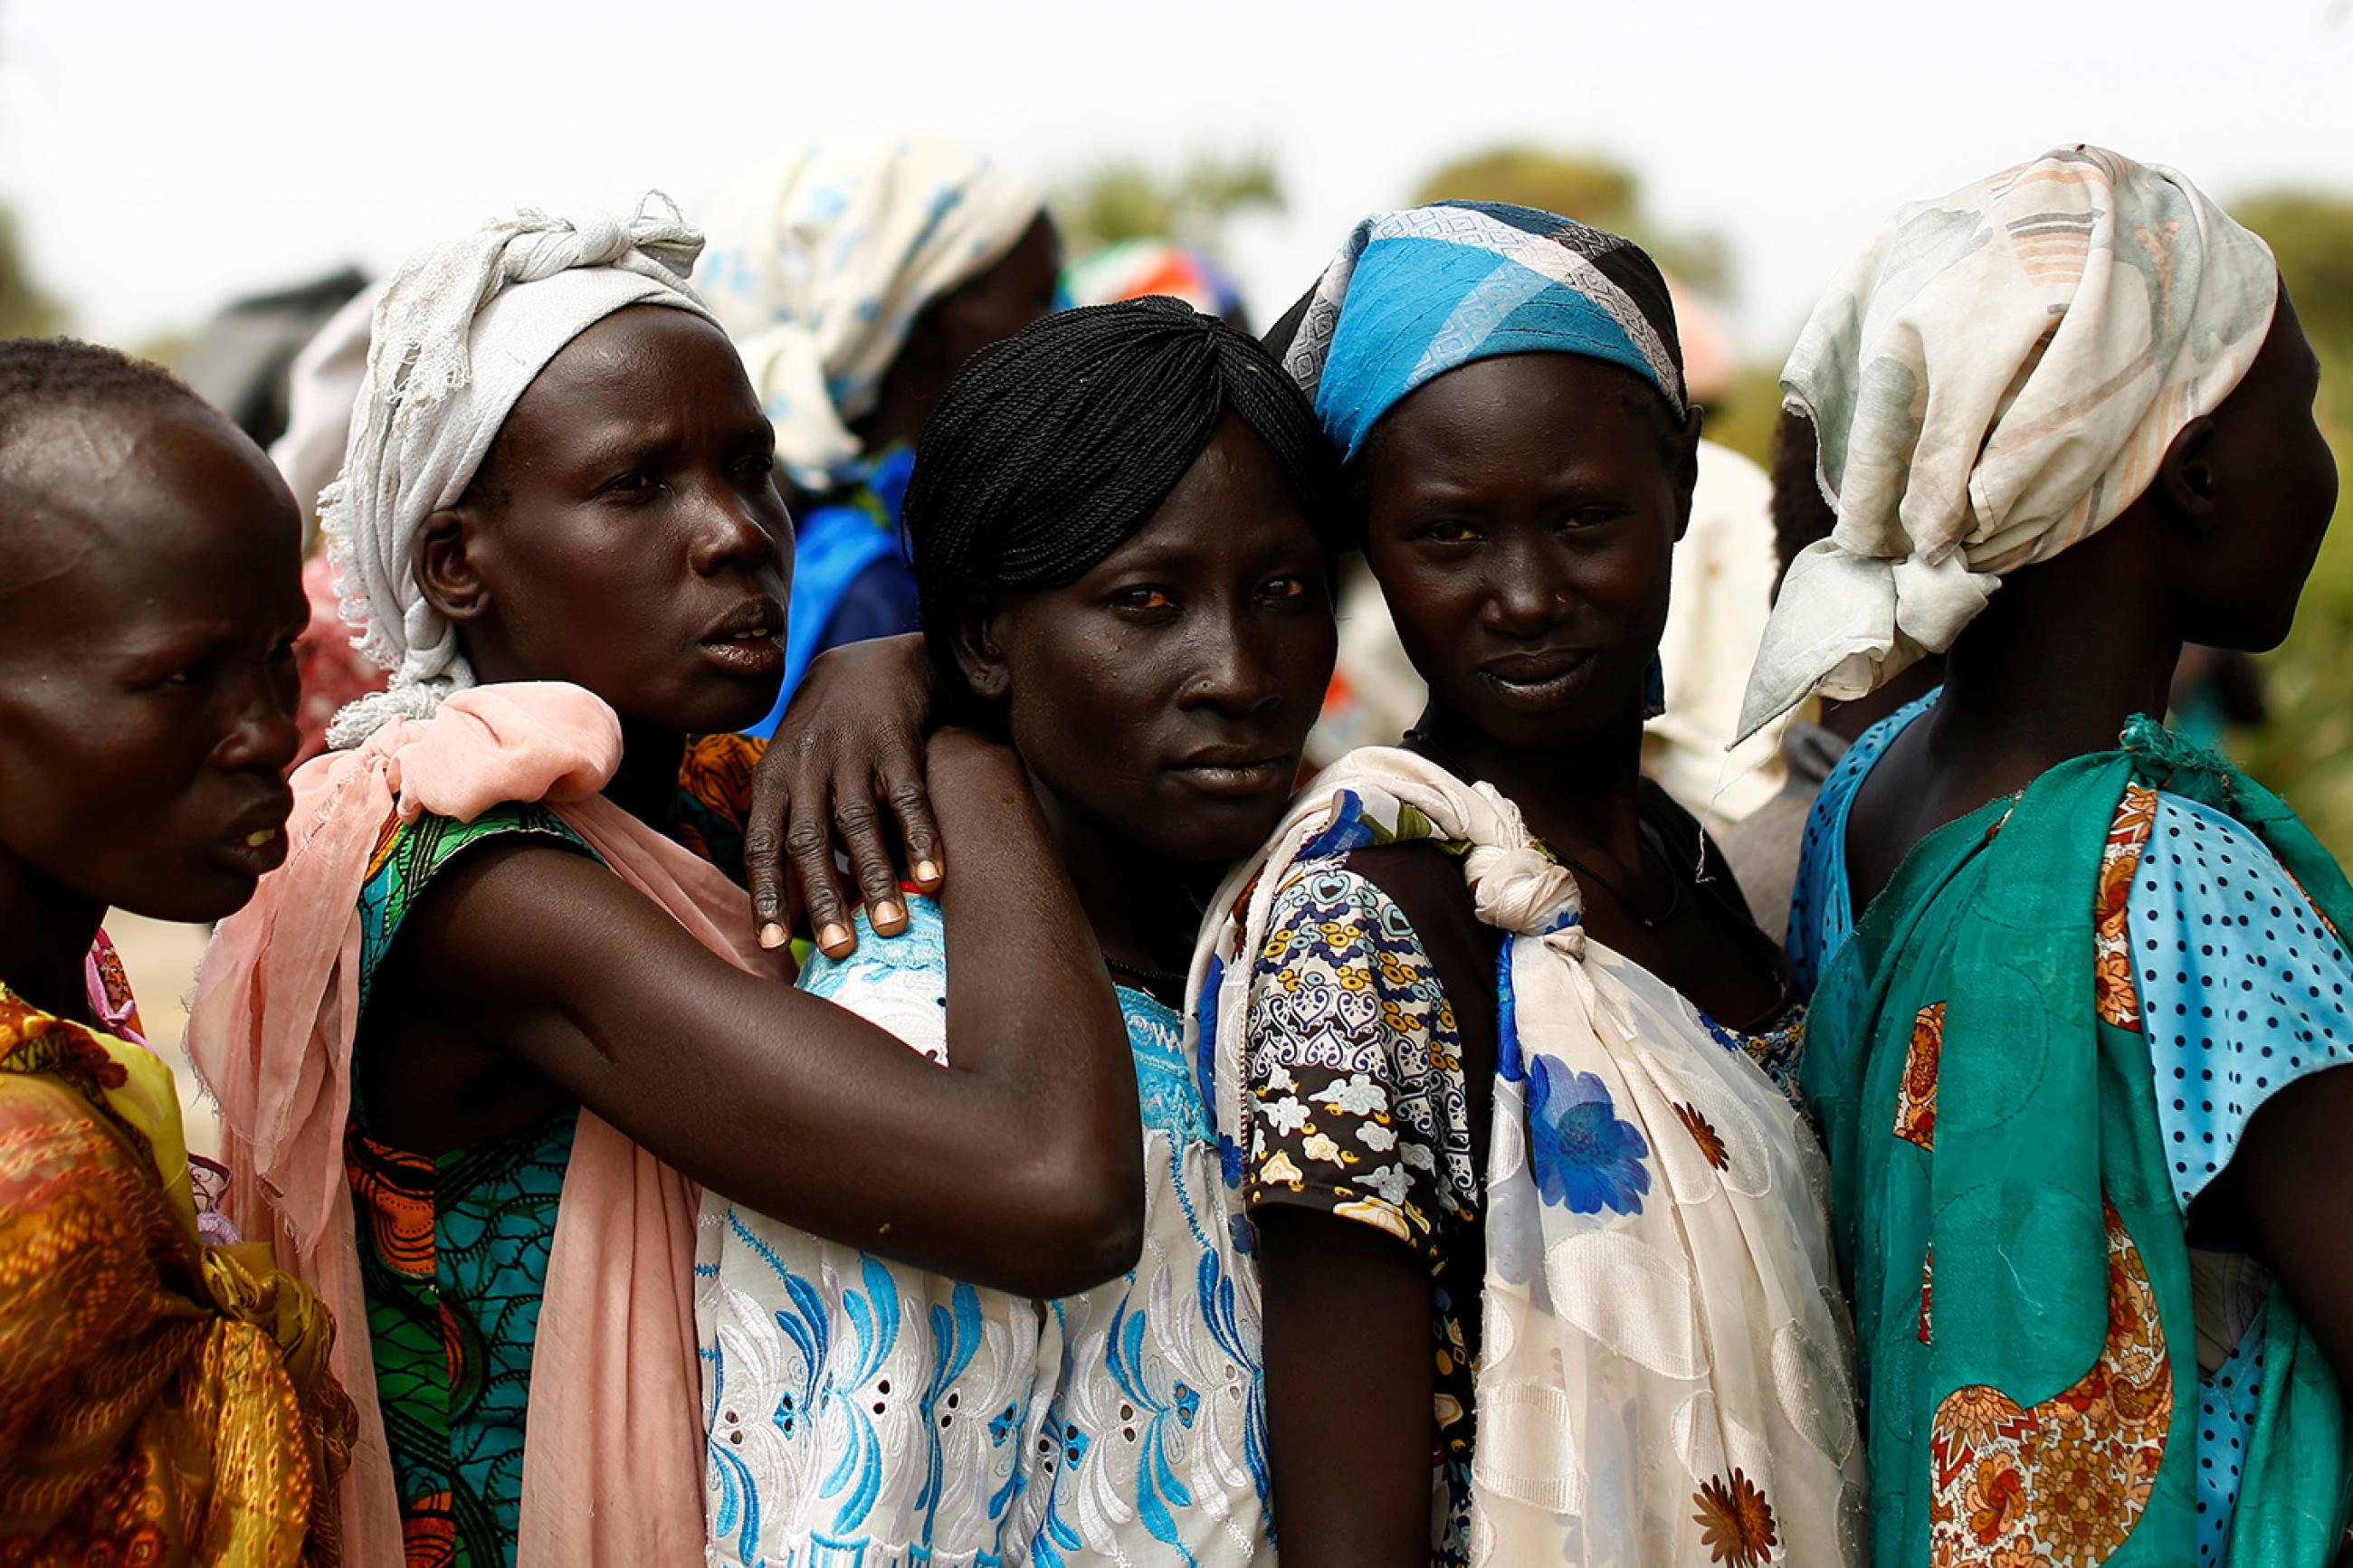 Women wait in line during a UNICEF supported mobile health clinic in the village of Rubkuai in Unity State, South Sudan on February 16, 2017. Picture shows five women in a line with more lined up on the other side of them. The three women in the middle are standing very close, and the third has her arms around the shoulders of the second, suggesting they all know each other. This photo is moving in its simple, straightforward humanity. REUTERS/Siegfried Modola